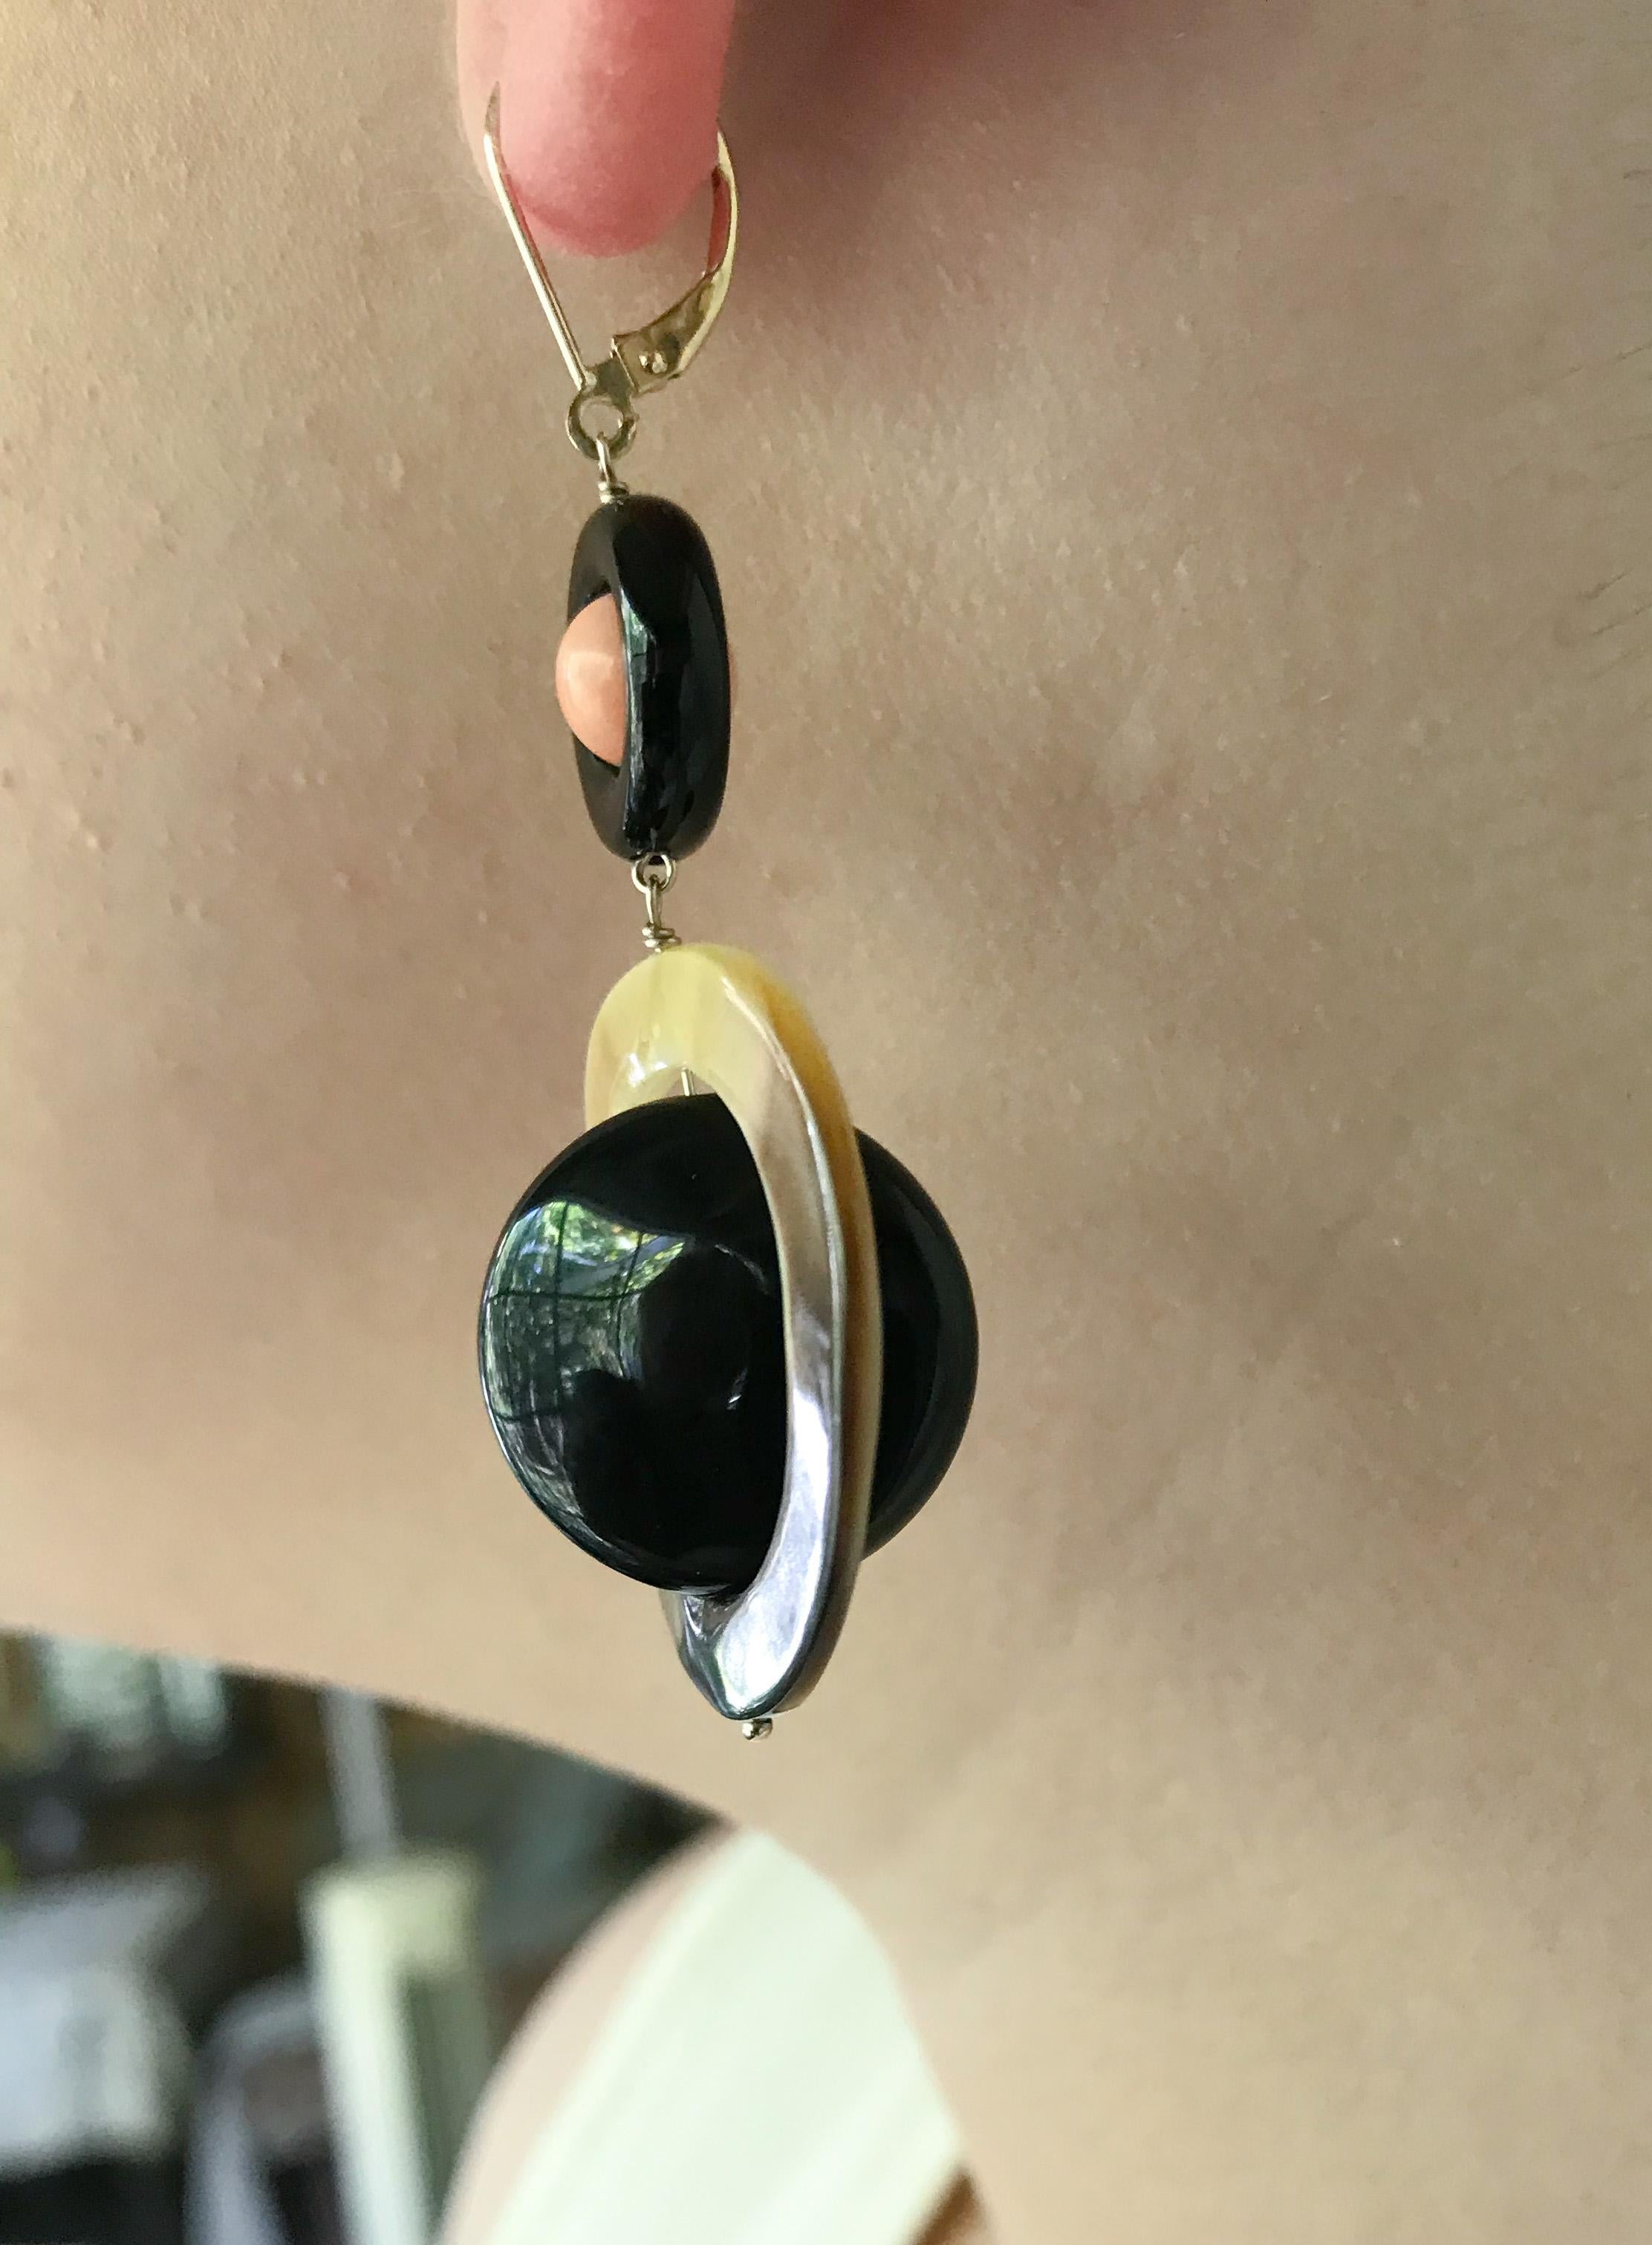 Brilliant Cut Marina J. Pink Coral, Black Onyx, Mother of Pearl Earrings with 14k Yellow Gold For Sale